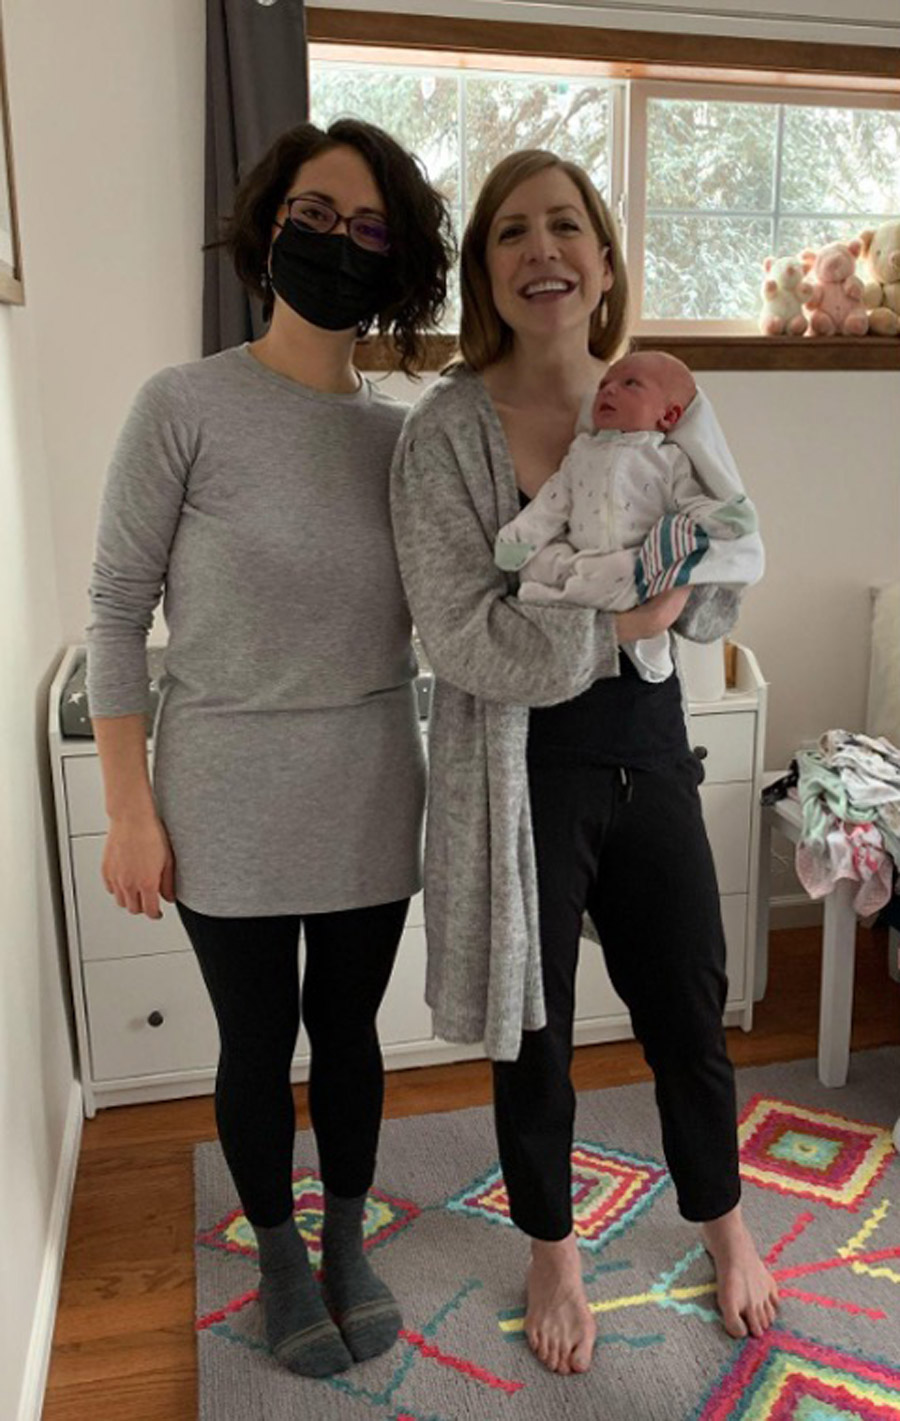 Lena with Penny and Loretta during a postpartum home visit